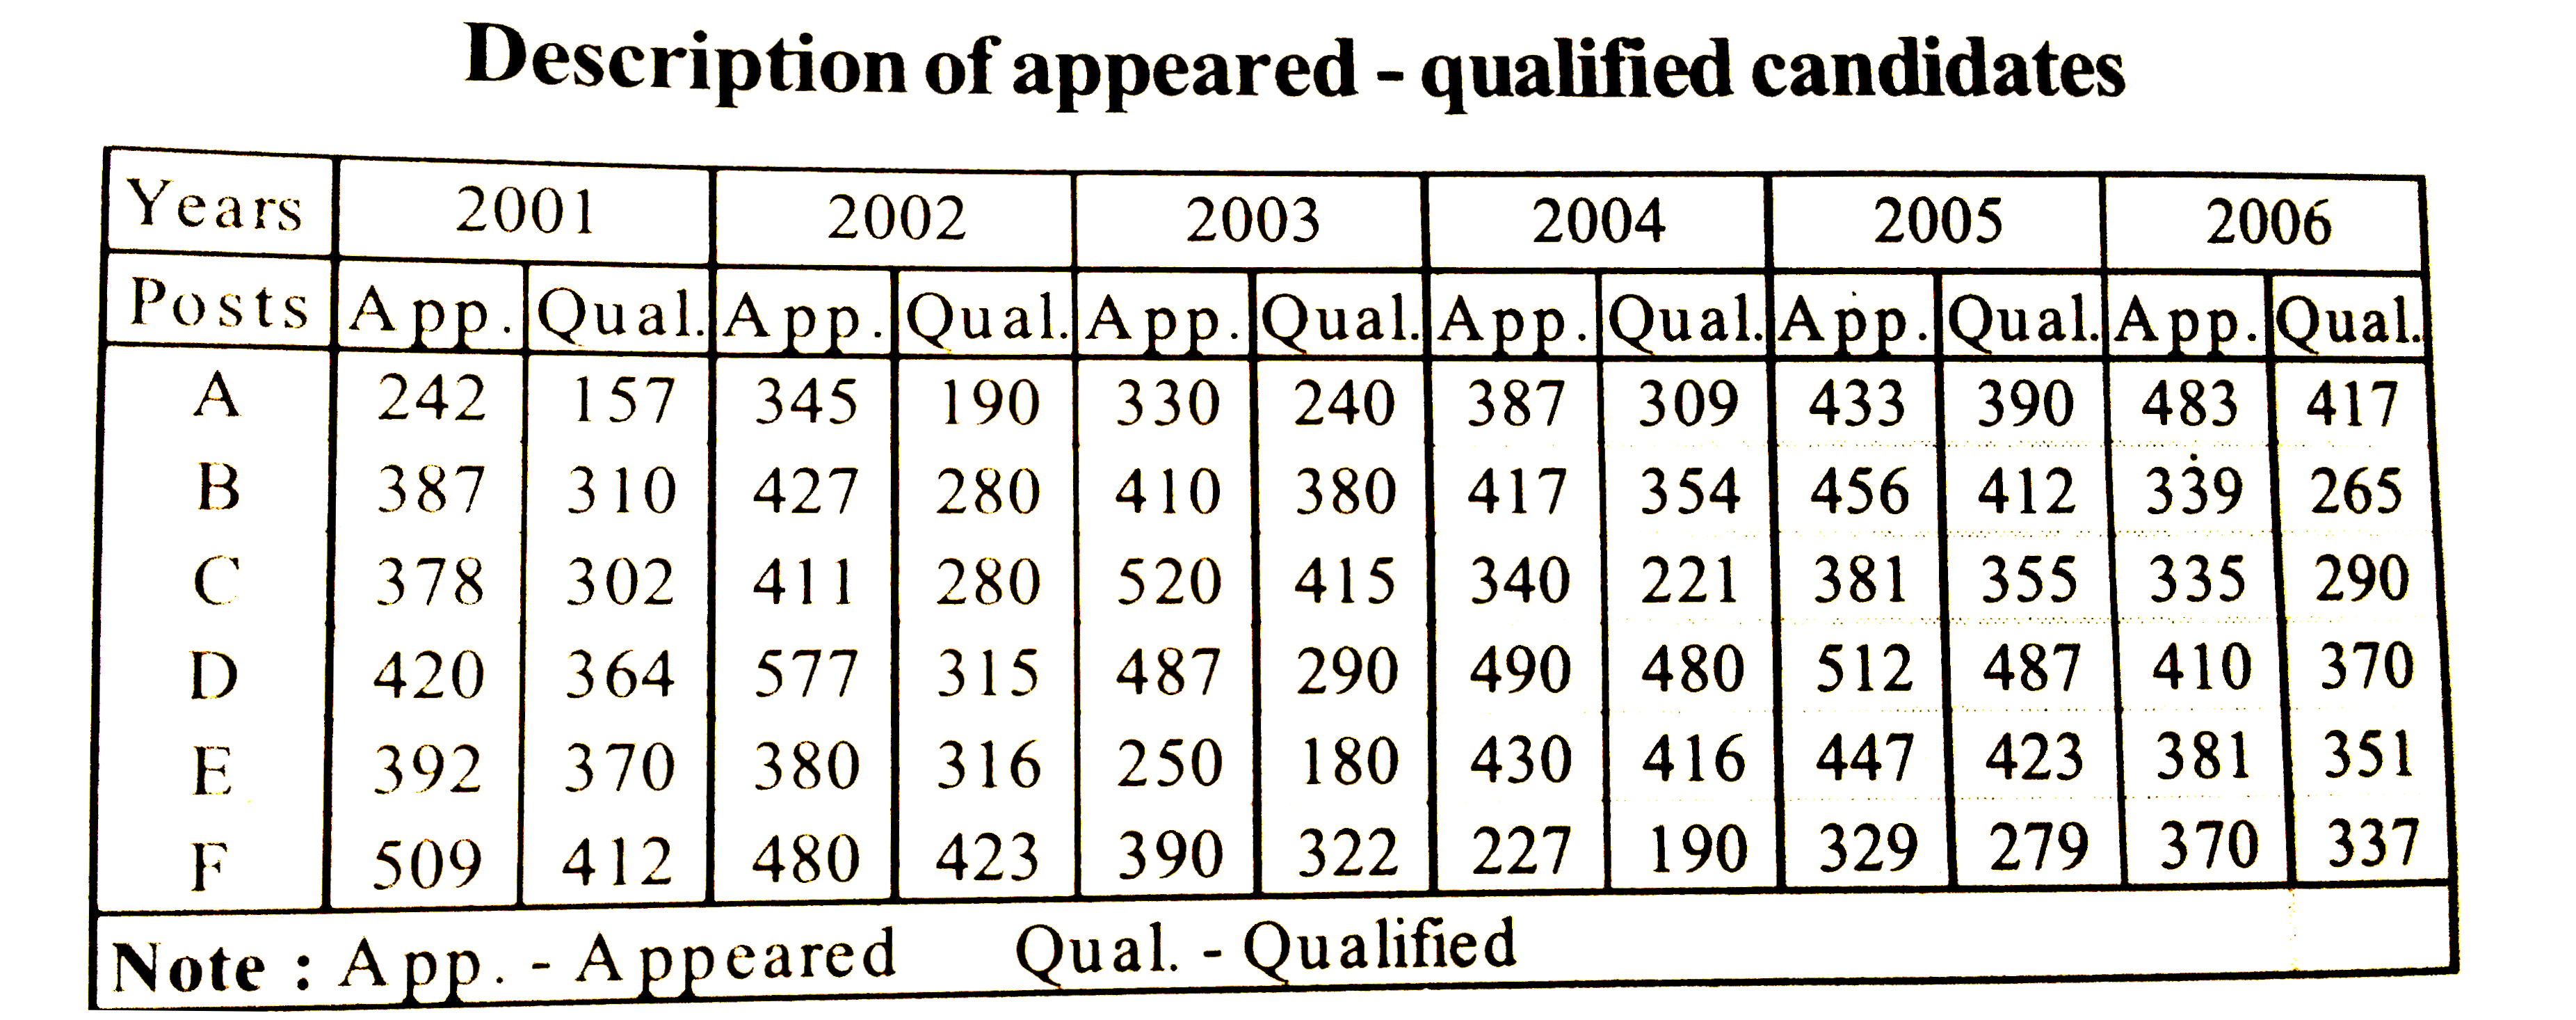 What is the approximate average number of candidates who appeared for all the points in the year 2006?